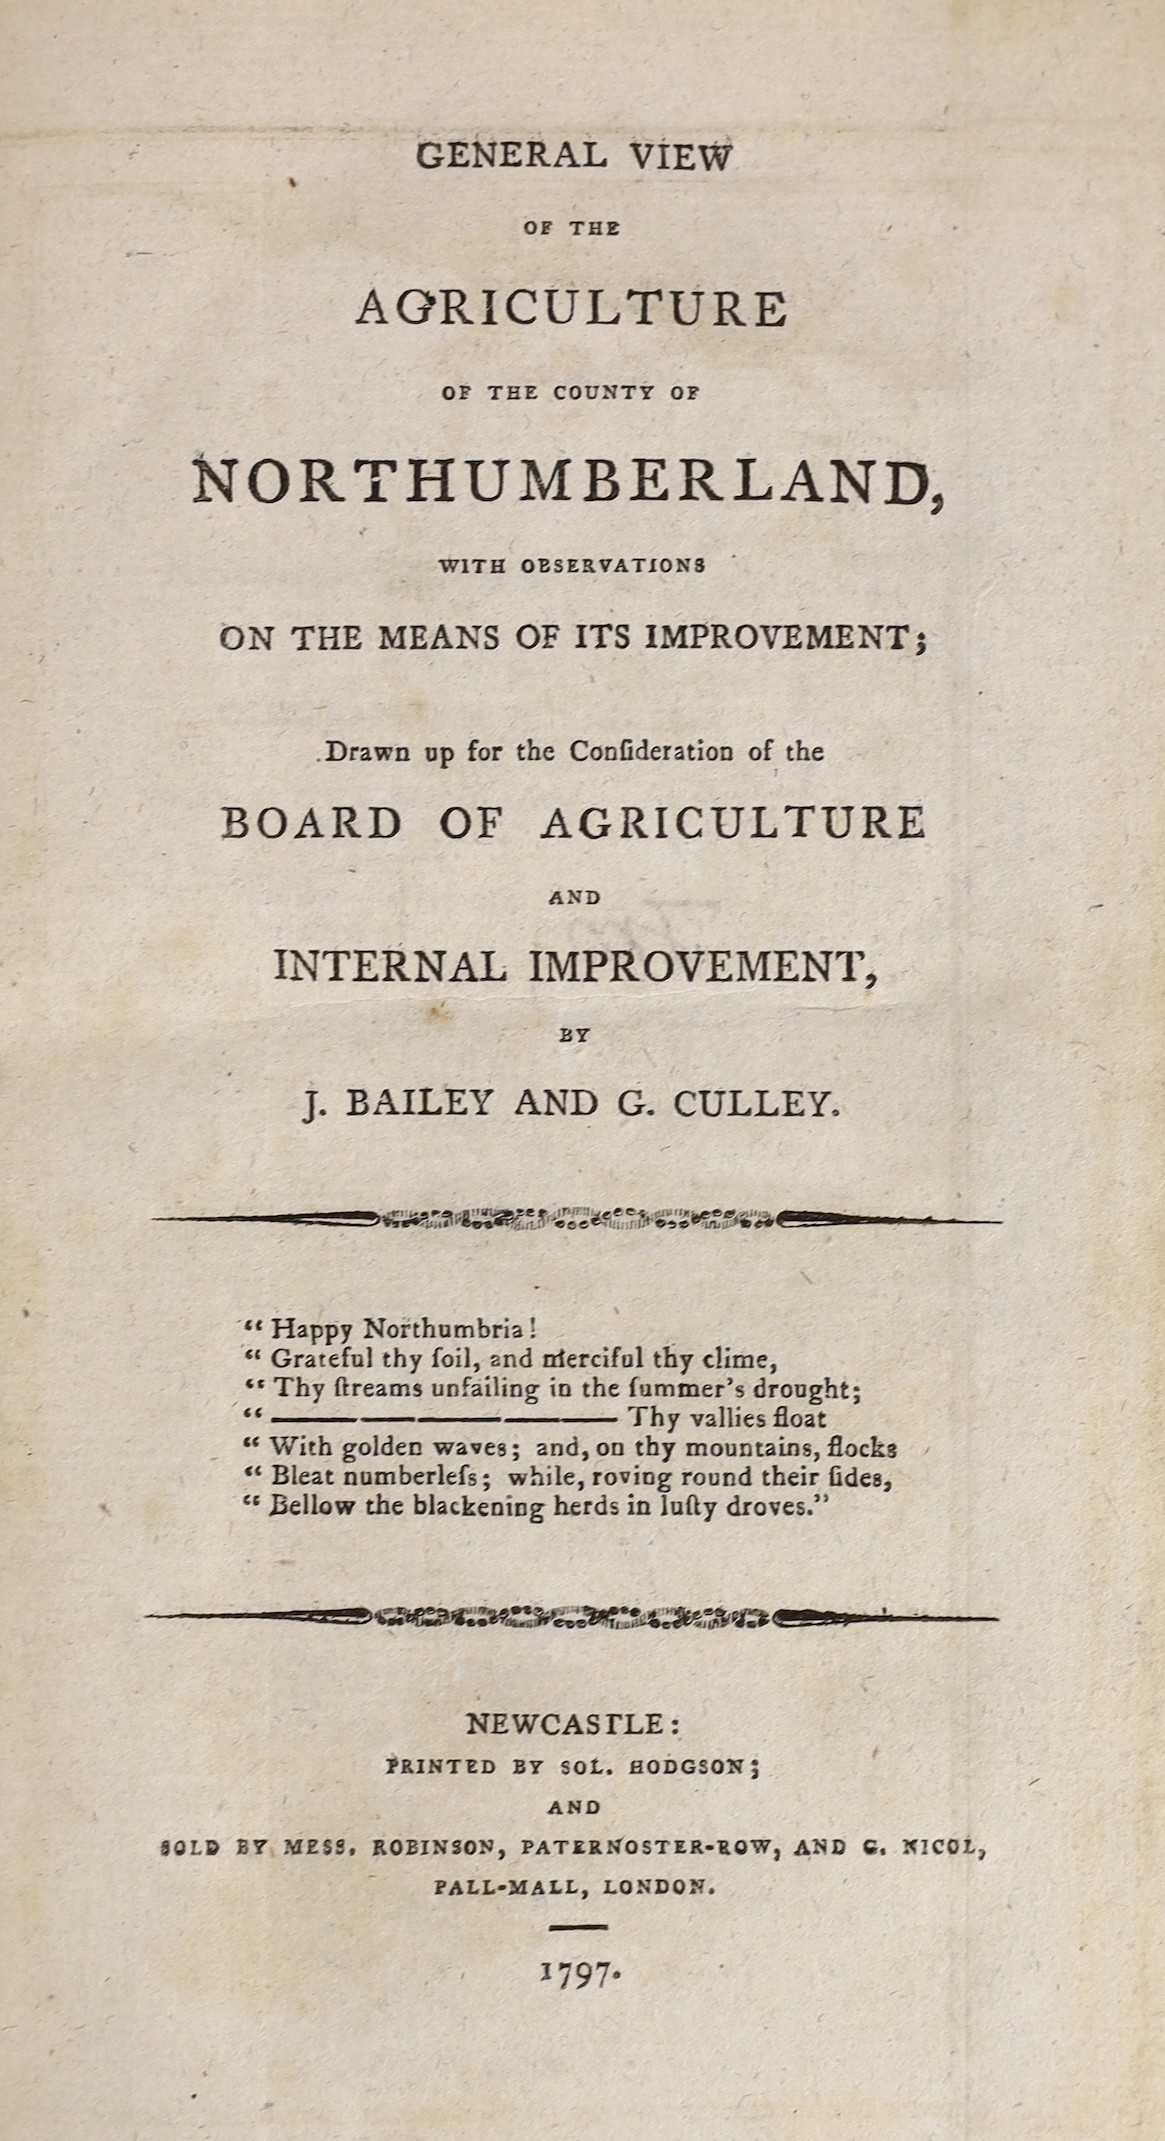 Bailey, J and Culley, G - General View of the Agriculture of the County of Northumberland, 1st edition, 3 works in 1 vol, bound with: General View of the Agriculture of…Cumberland and Pringle, A - General View of the Agr